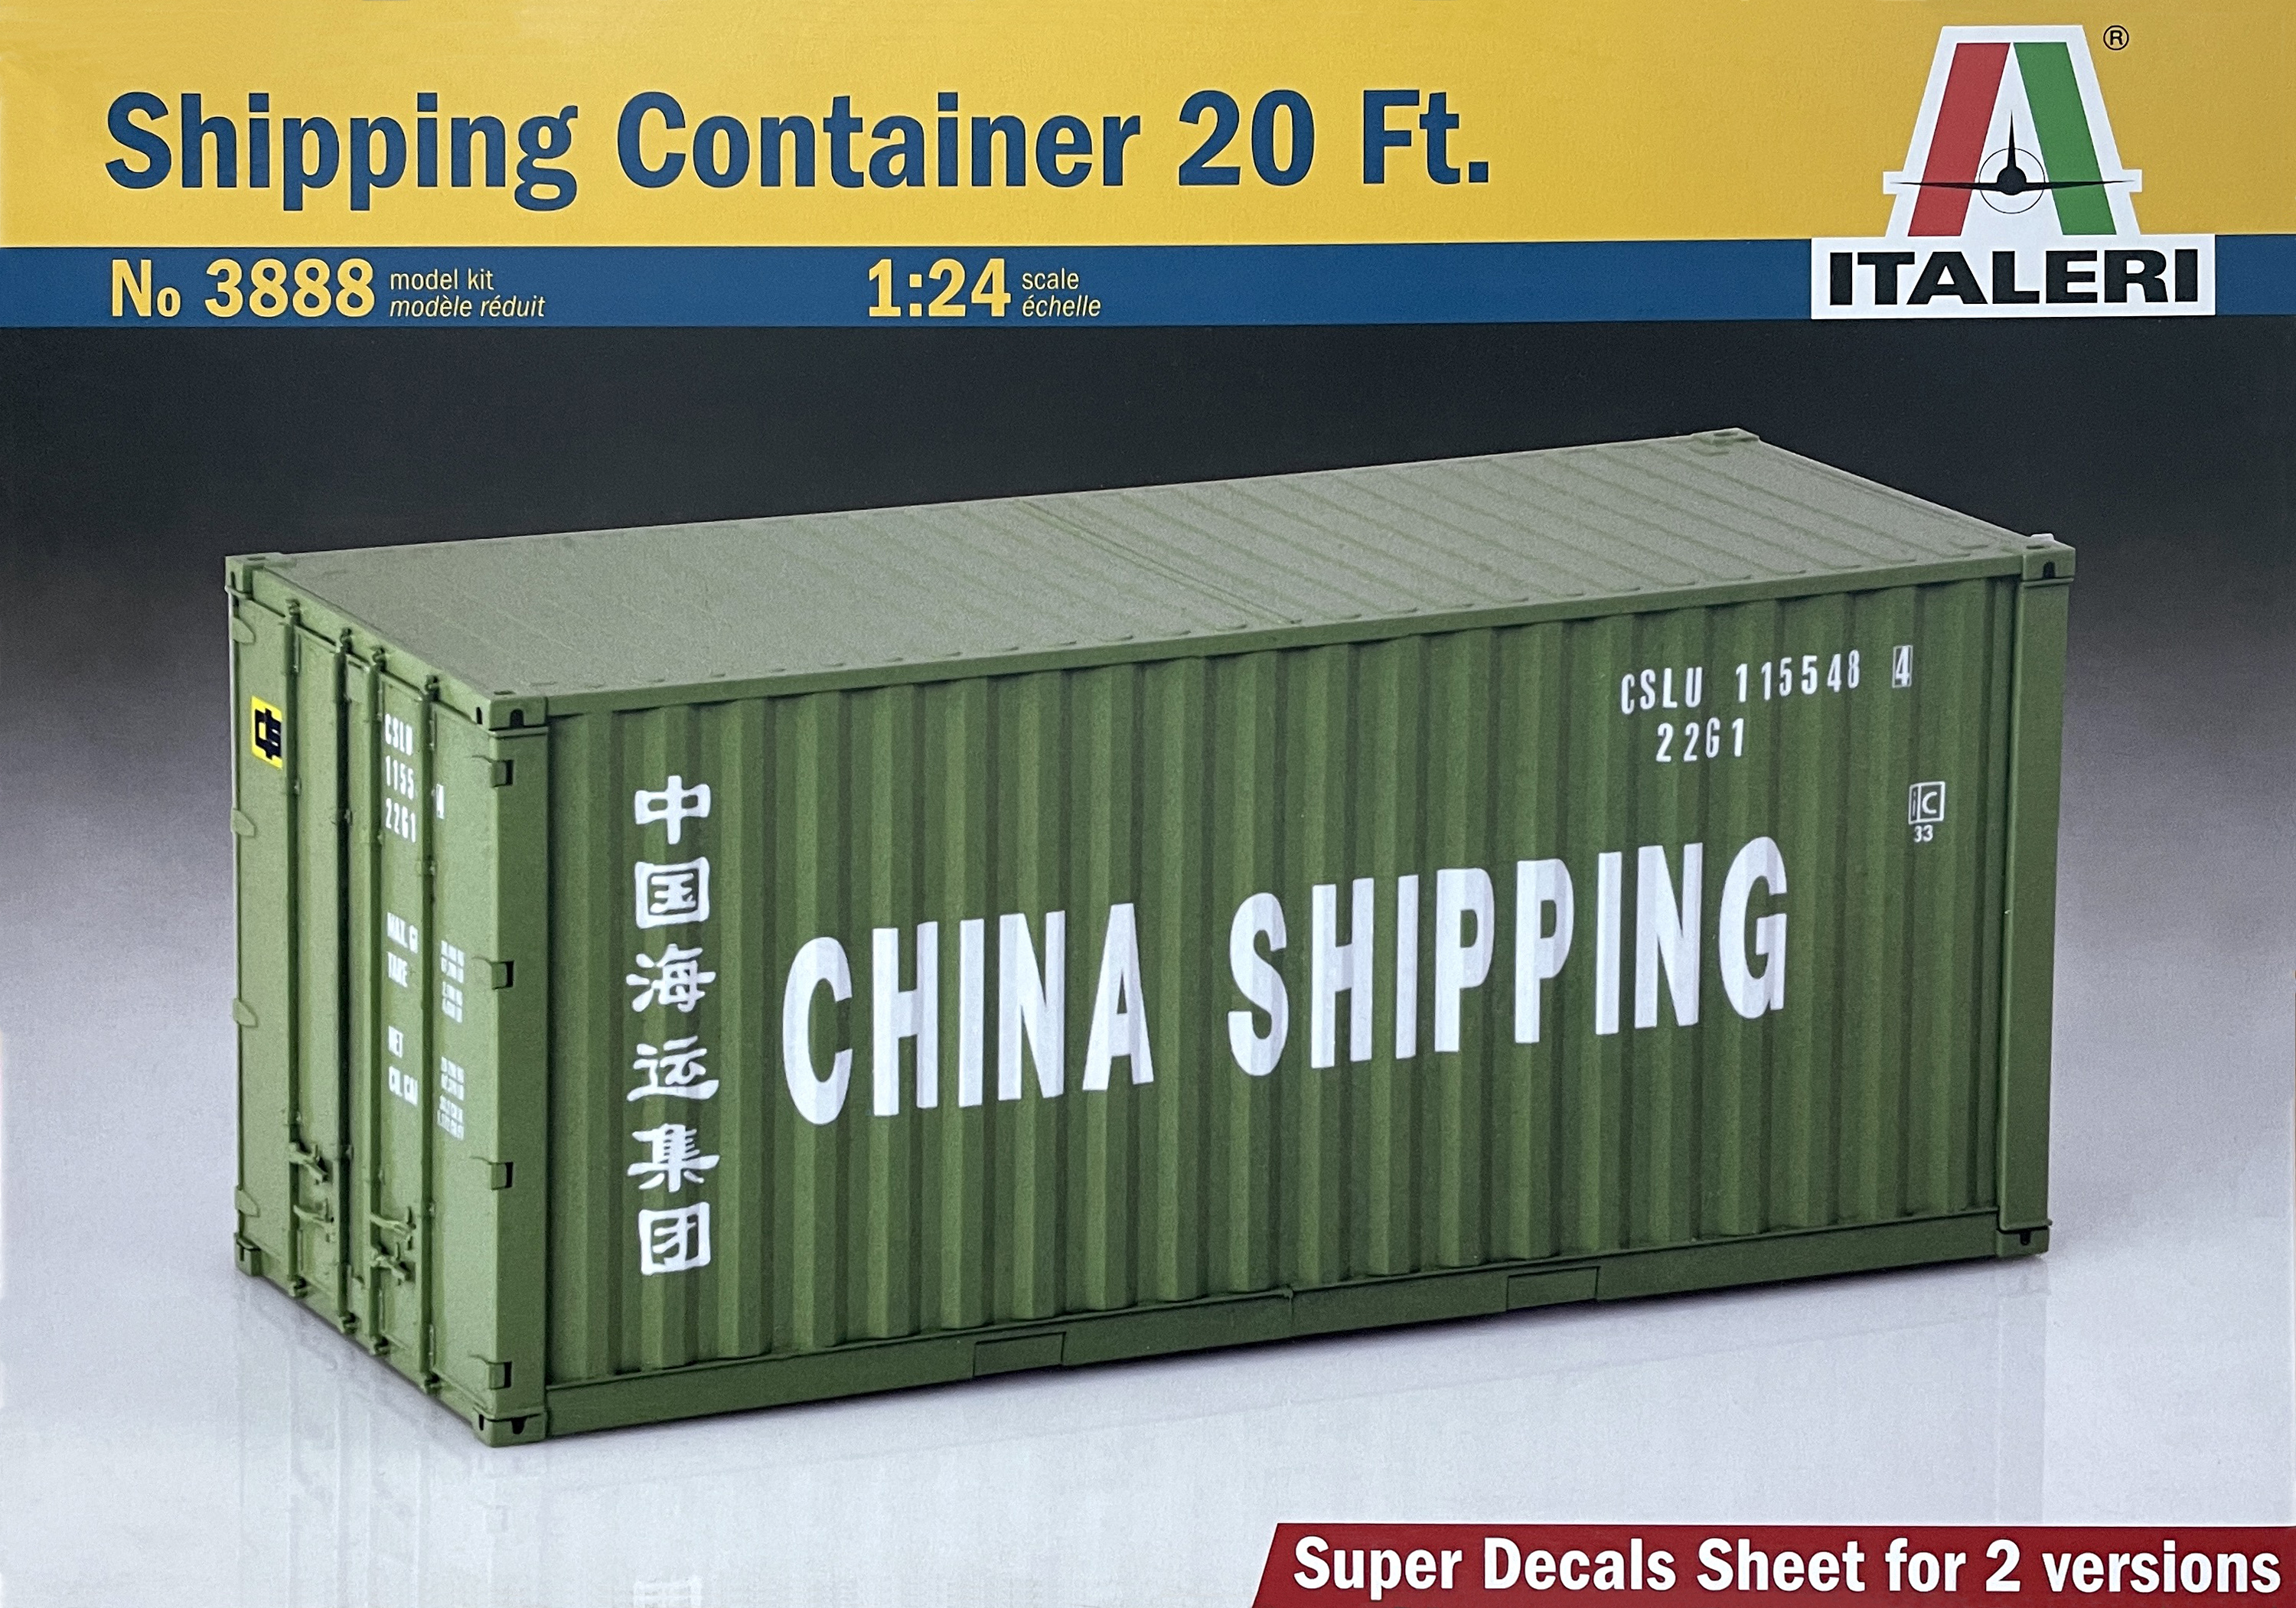 3888 Italeri 1/24 Shipping Container 20 Ft.